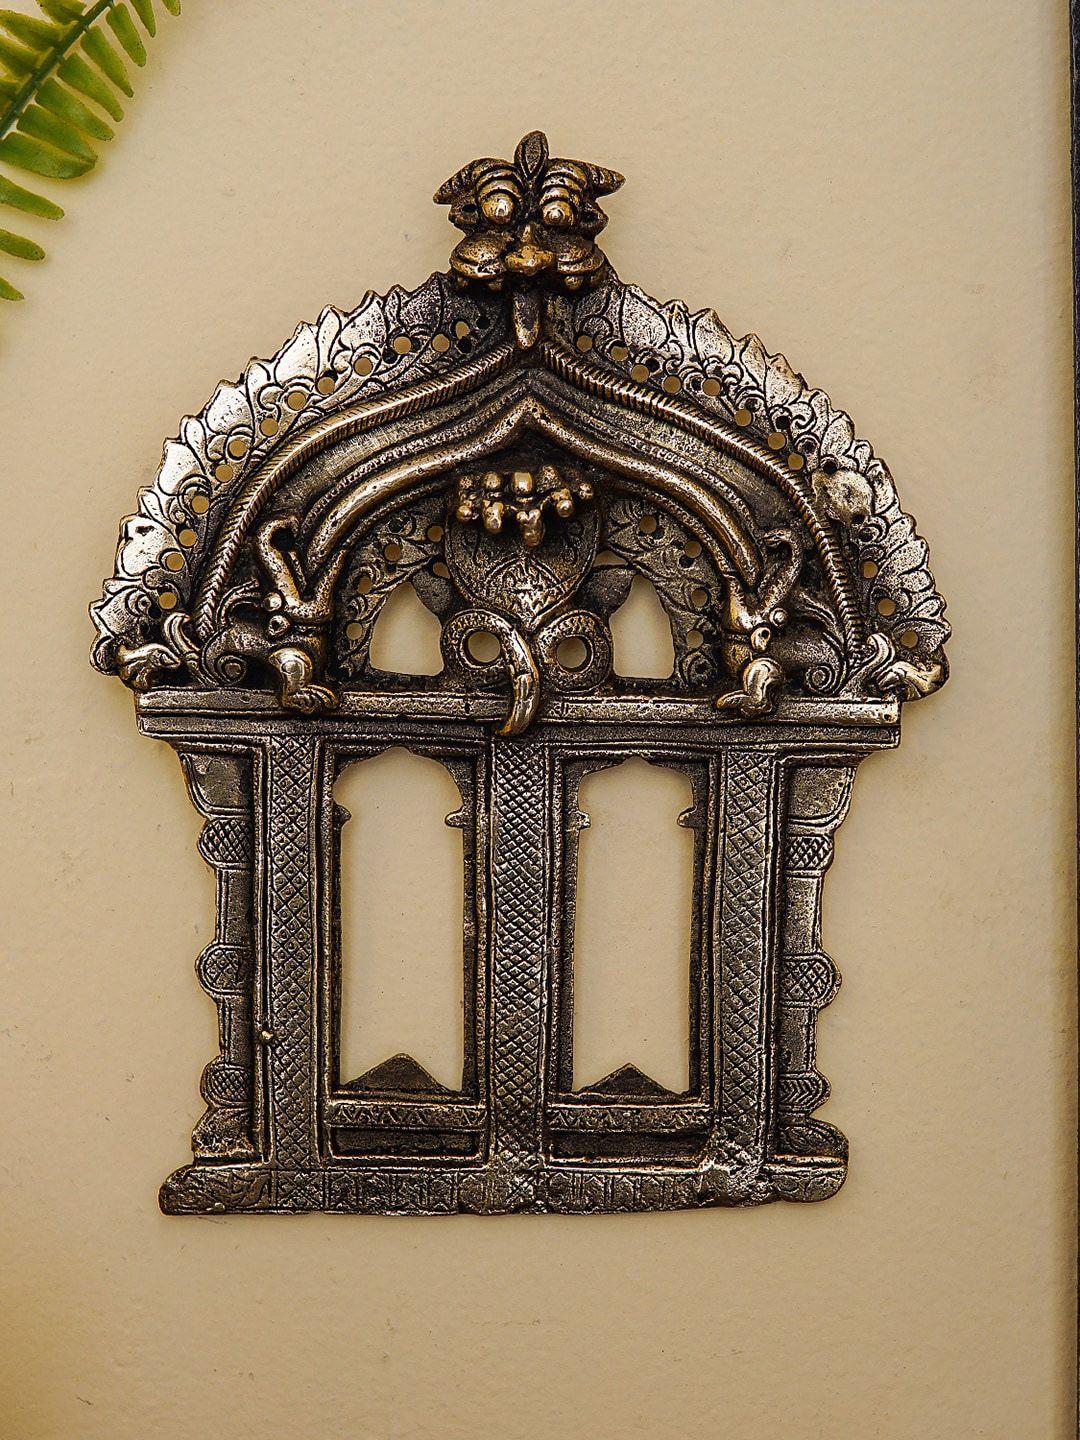 StatueStudio Gold-Toned Prabhavali Temple Design Frame Wall Hanging Showpiece Price in India